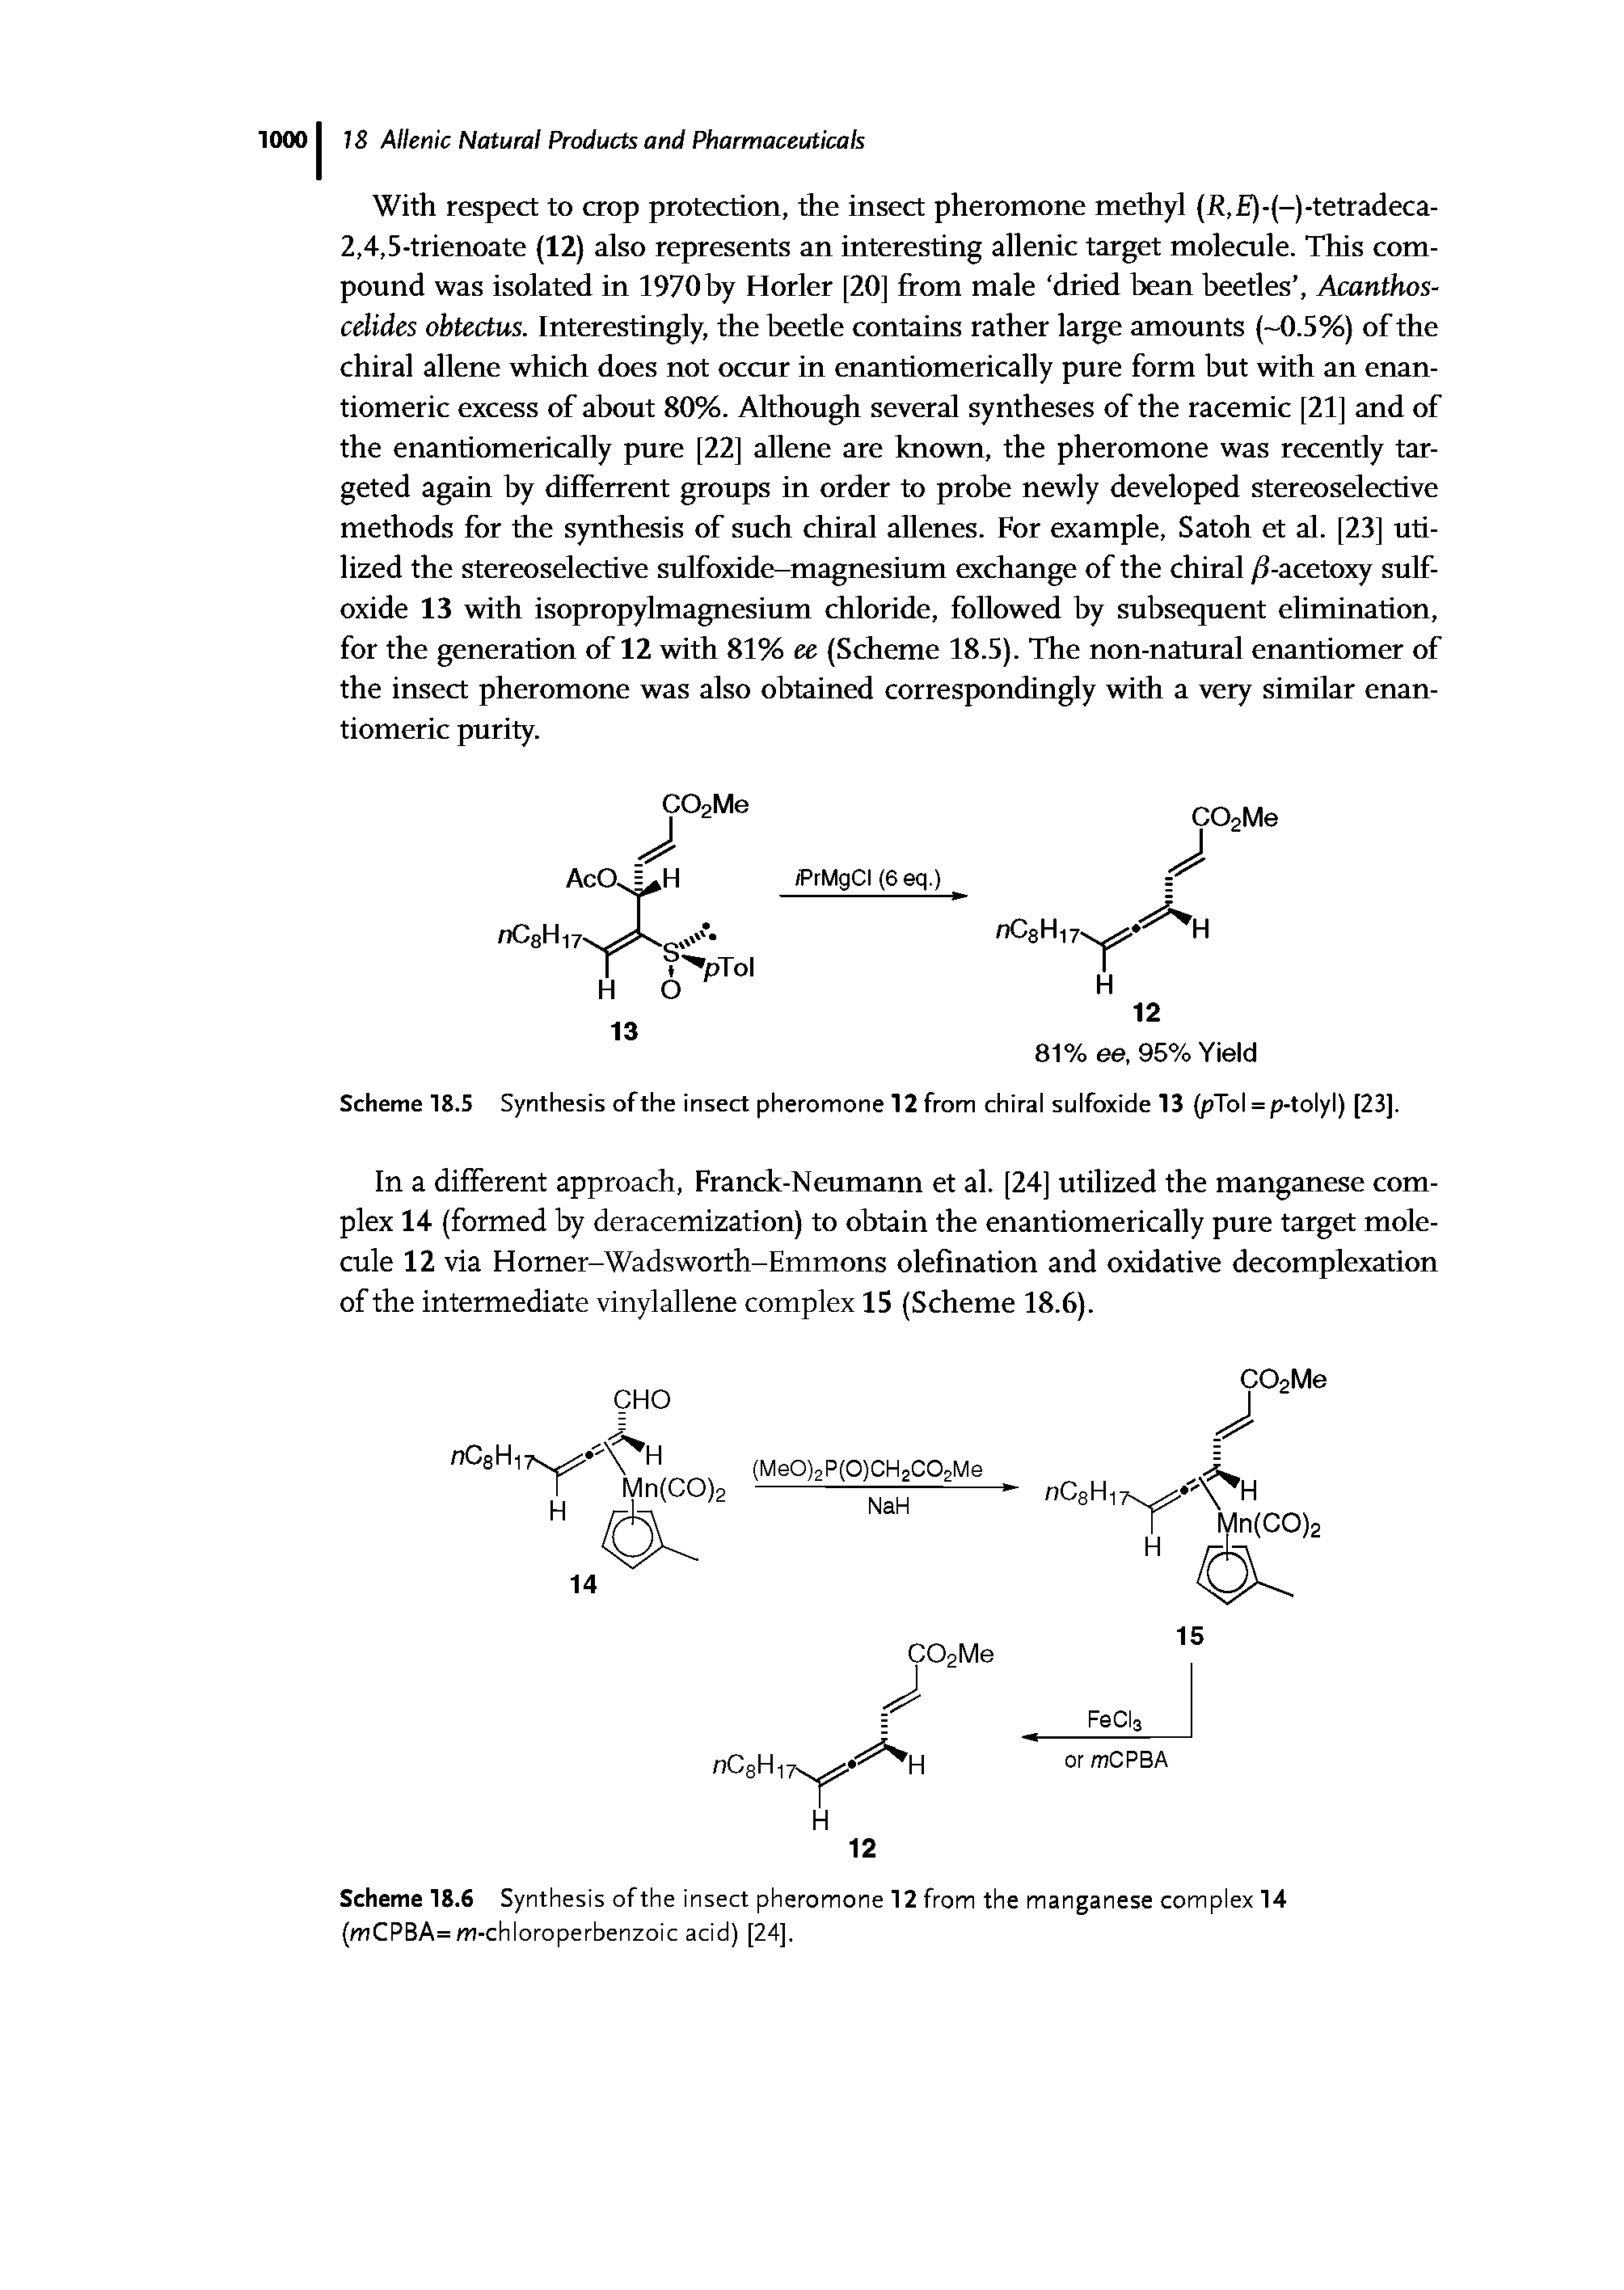 Scheme 18.5 Synthesis of the insect pheromone 12 from chiral sulfoxide 13 (pTol = p-tolyl) [23].